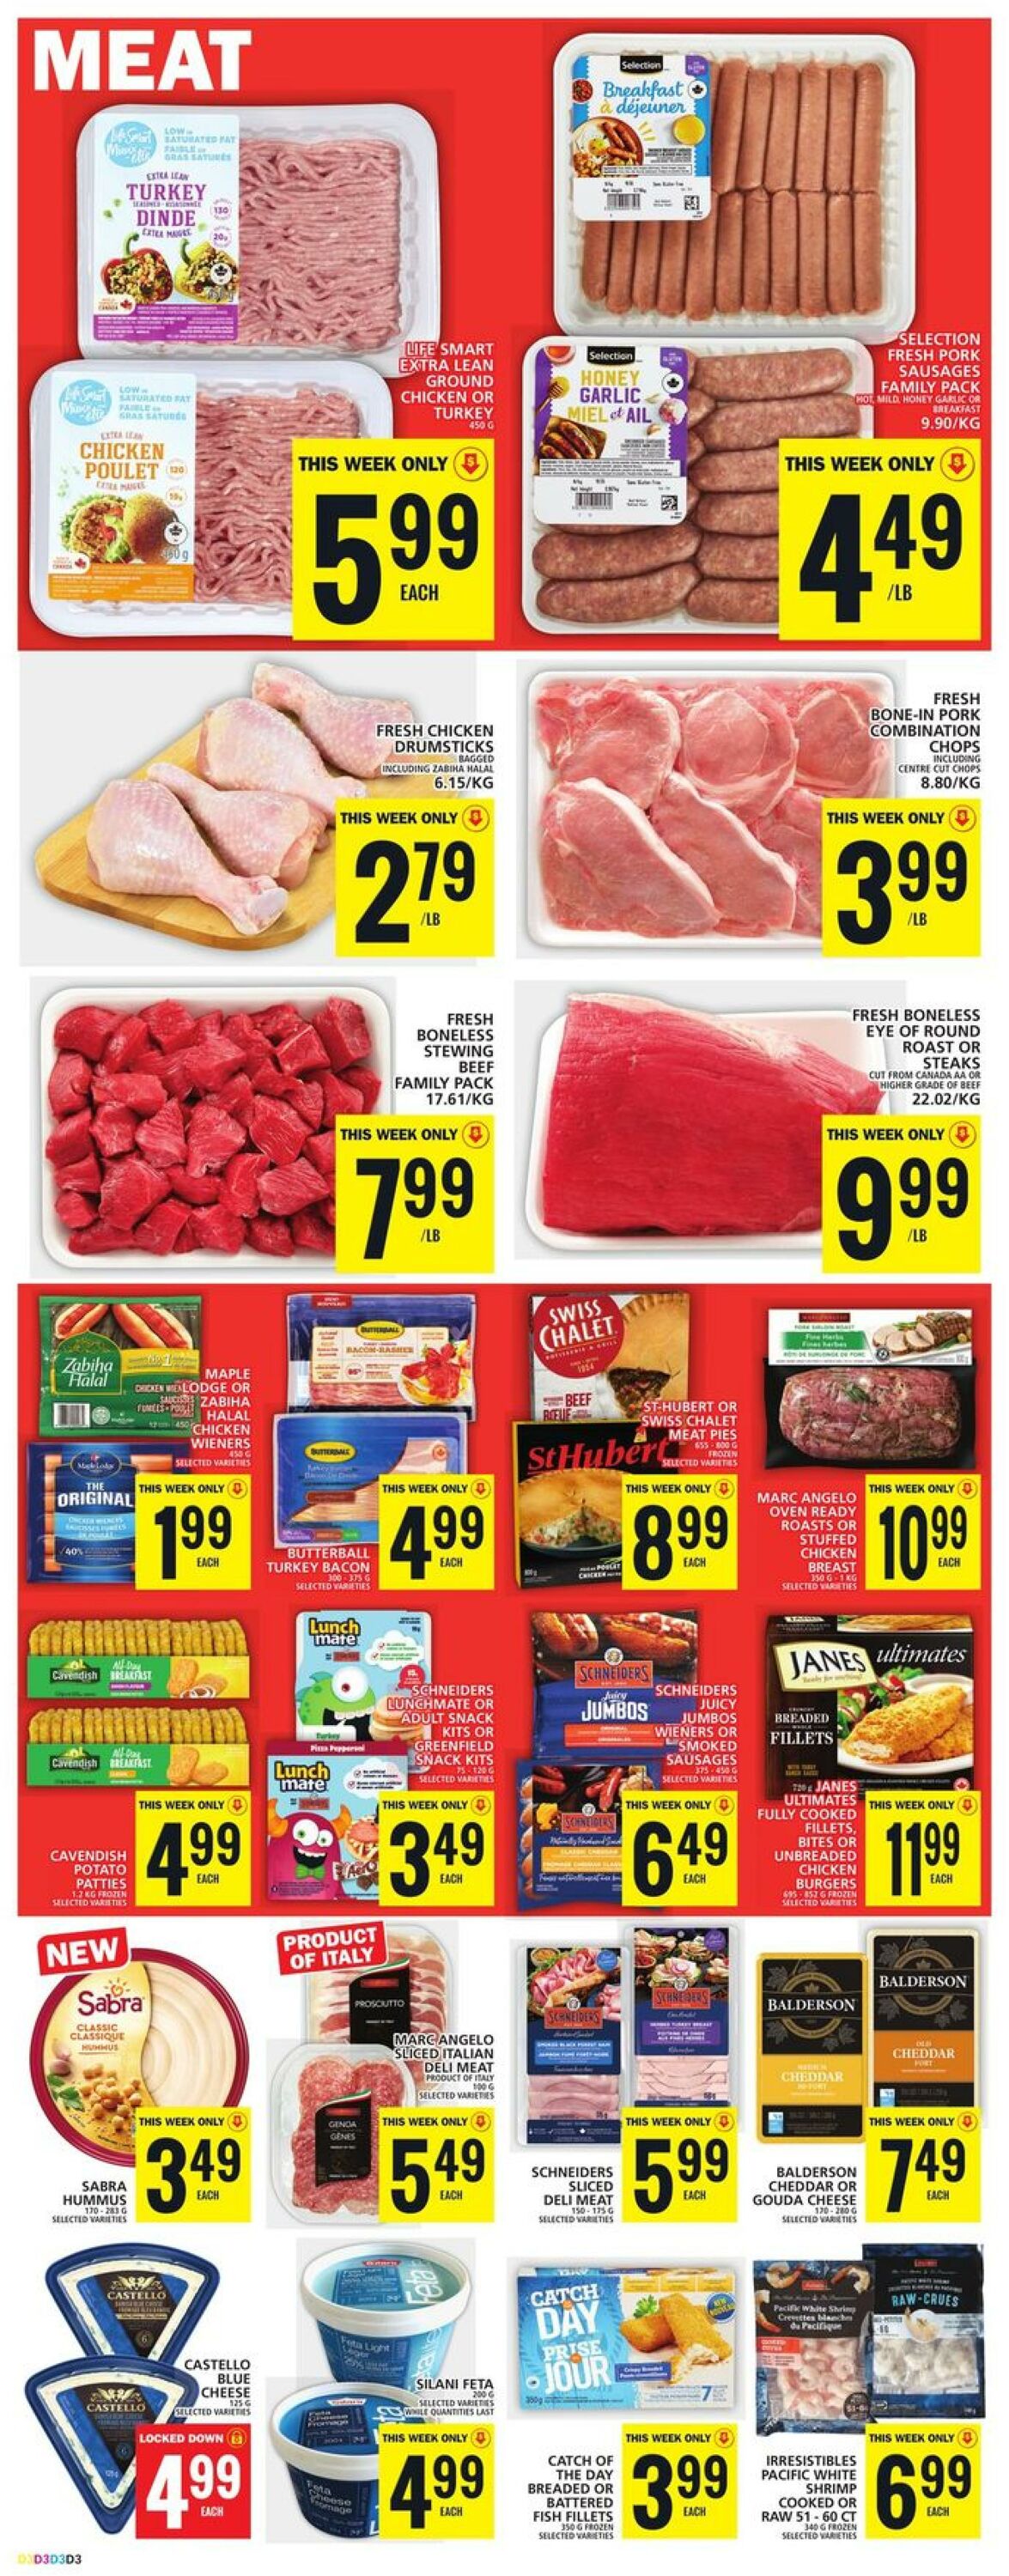 Food Basics Promotional Flyer - Valid from 09.11 to 15.11 - Page nb 6 ...